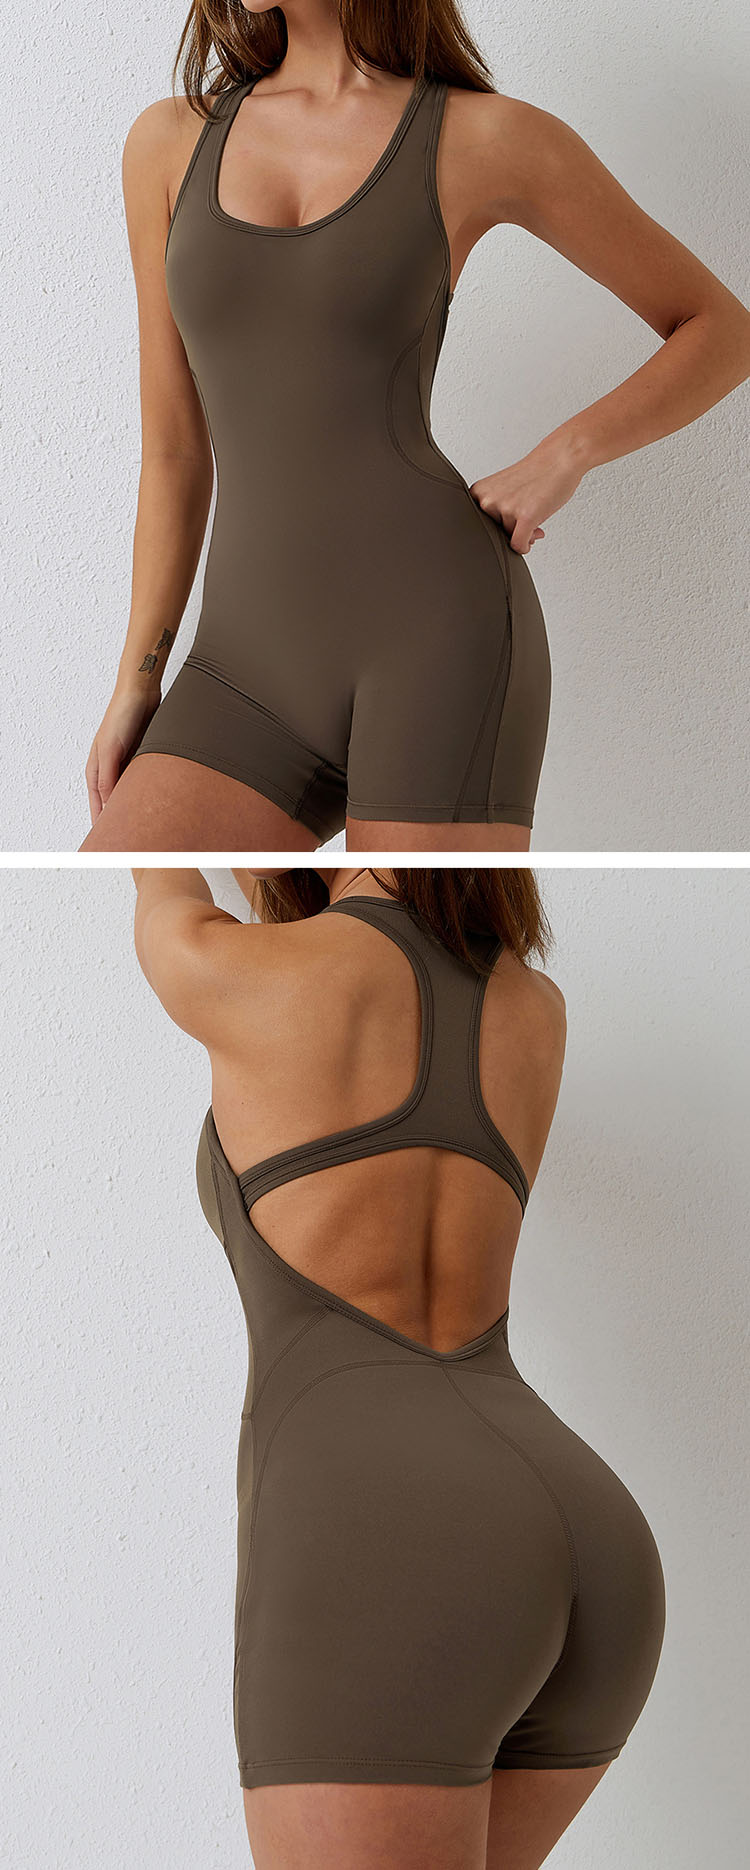 Hollow back design is adopted to reveal sexy back lines, which is slim and slim